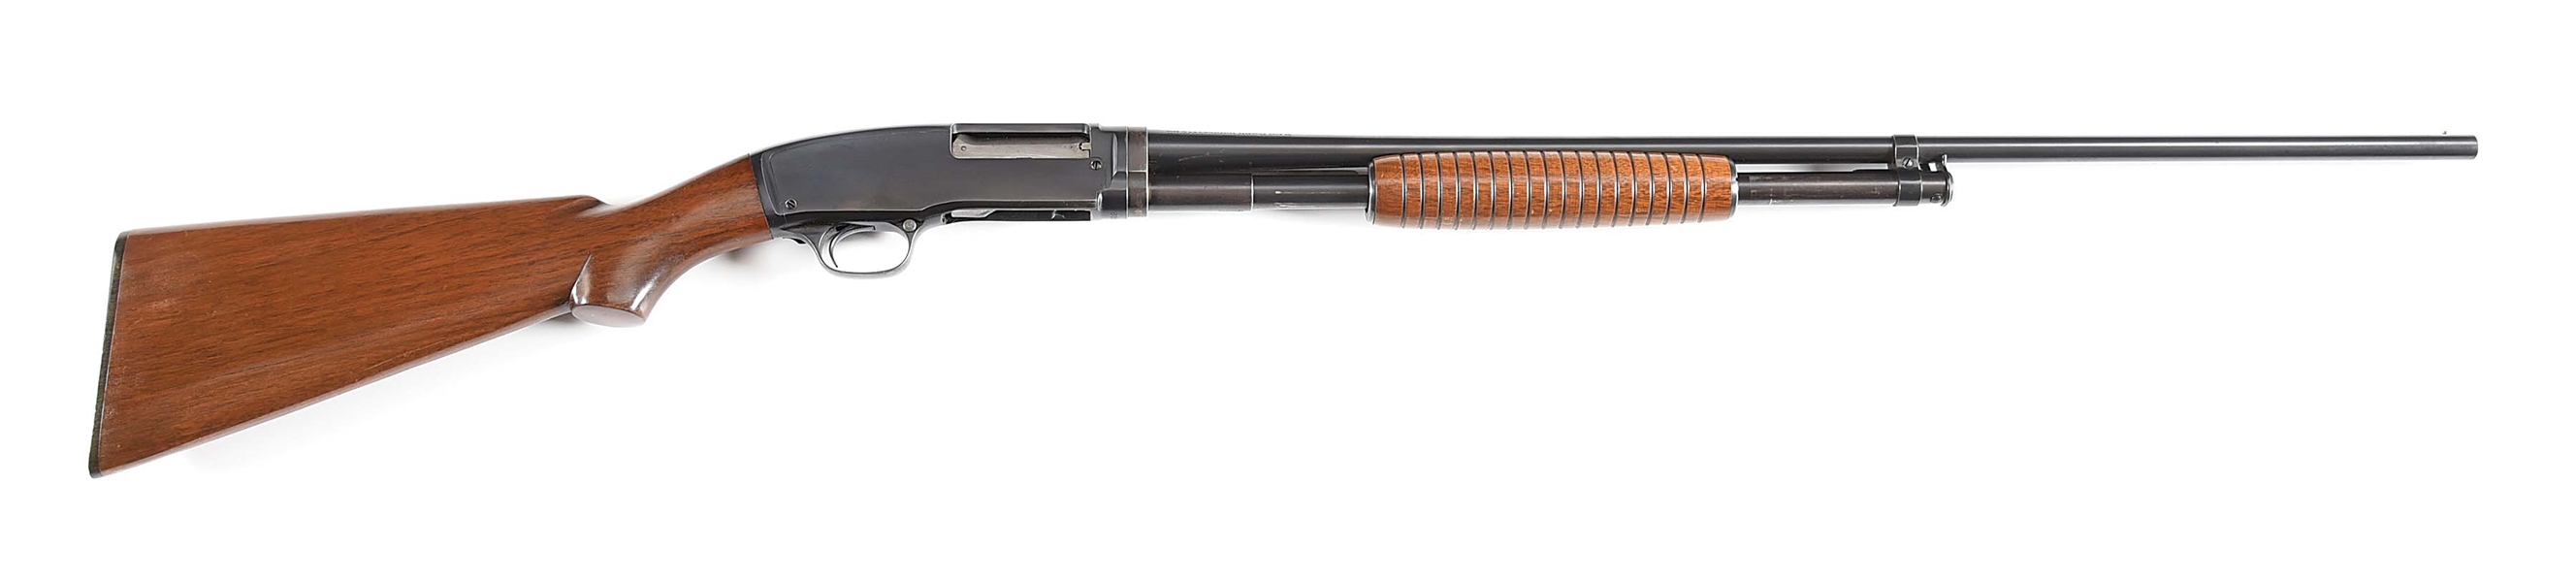 (C) WINCHESTER FIRST YEAR PRODUCTION MODEL 42 SLIDE ACTION SHOTGUN IN .410 BORE.